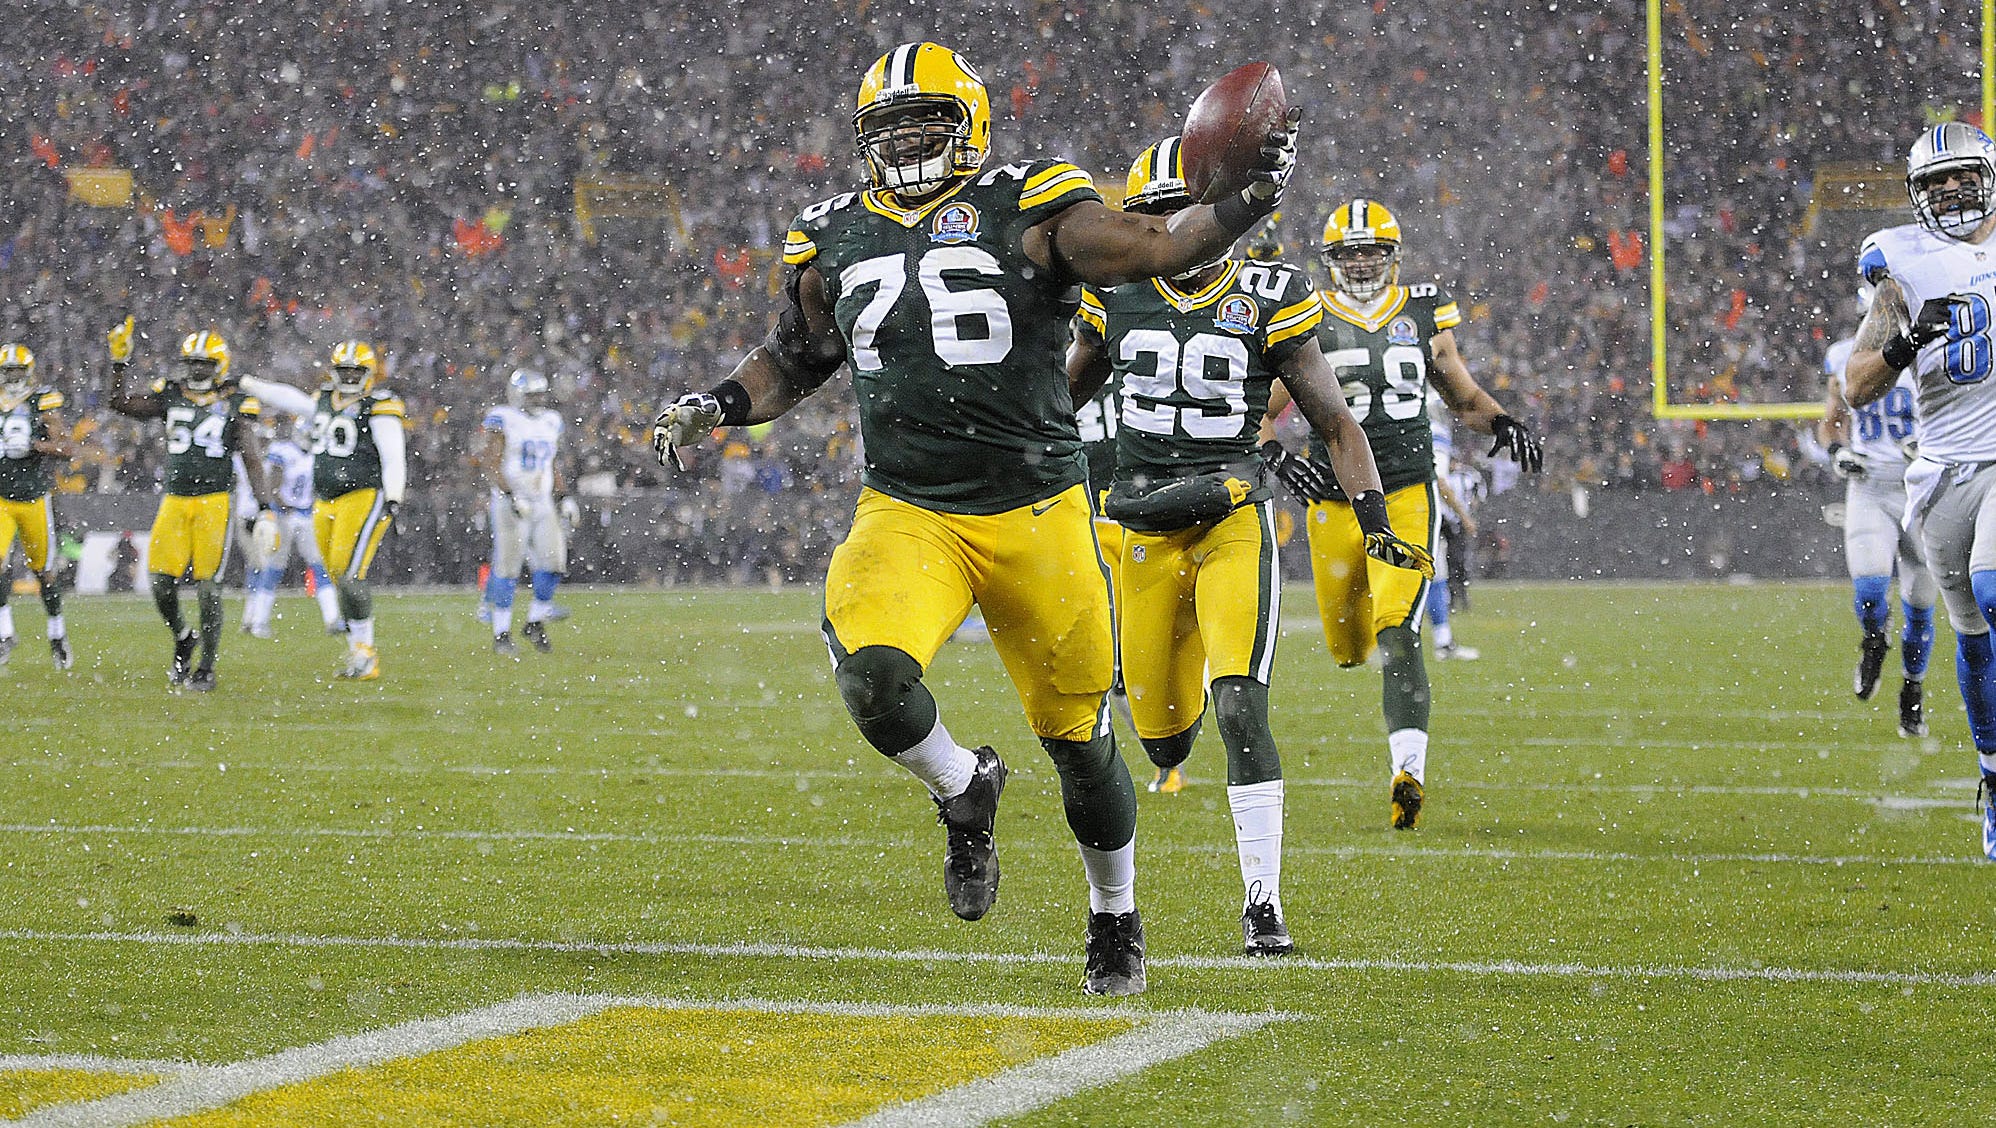 Green Bay Packers defensive end Mike Daniels (76) runs into the end zone after recovering a fumble and returning it for a touchdown in the second quarter of a 2012 game against the Detroit Lions at Lambeau Field.